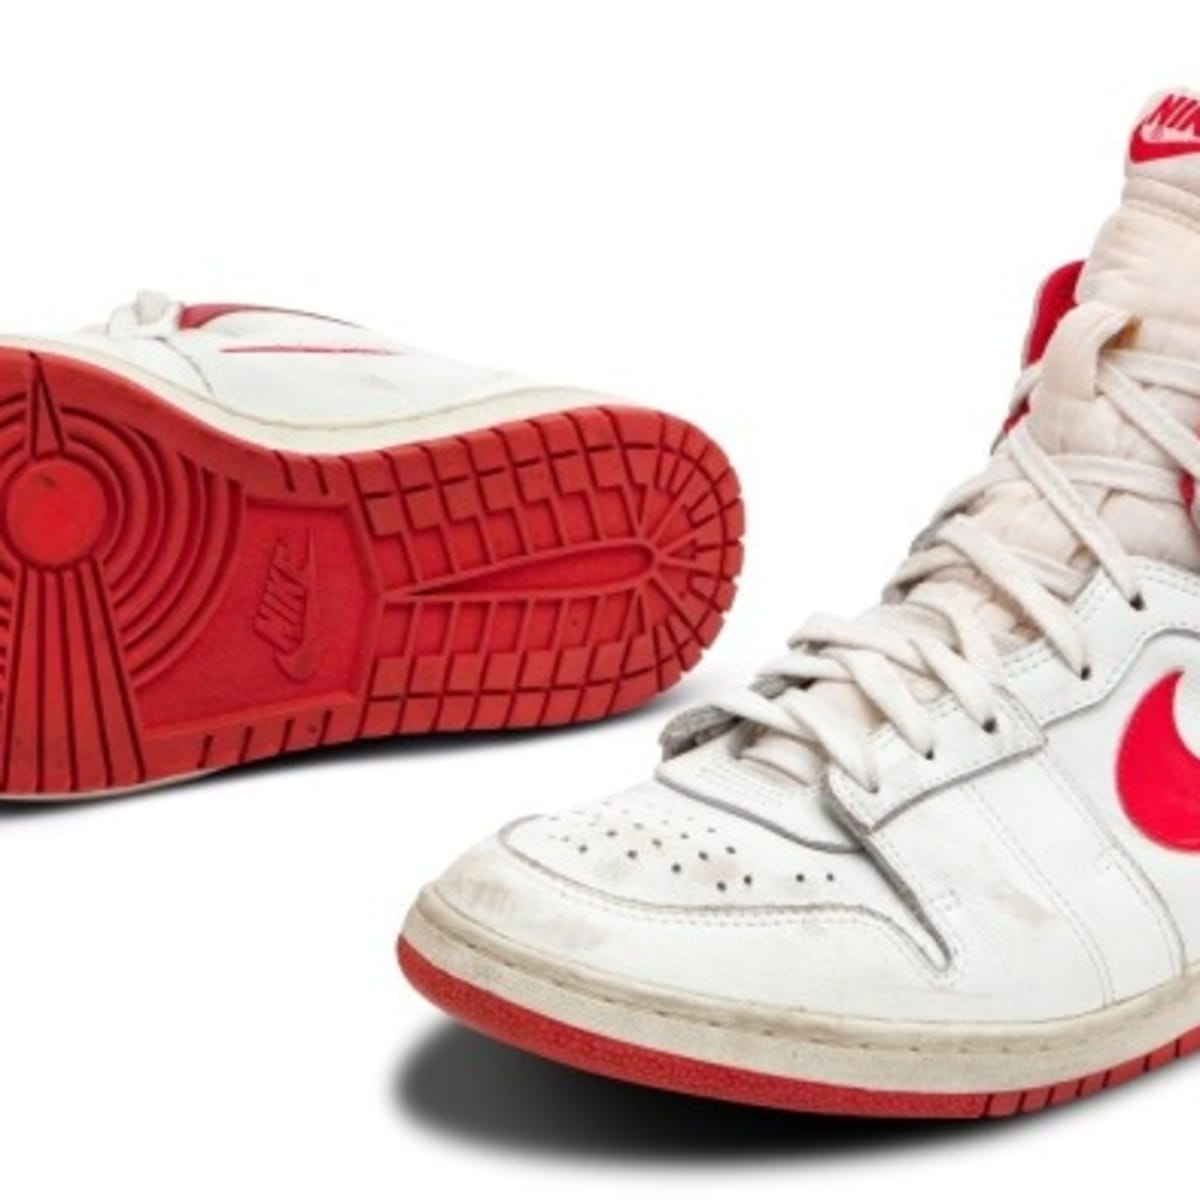 Michael Jordan's 1984 Nike Air Ship Sneakers Break Record Sale at Sotheby's  Auction